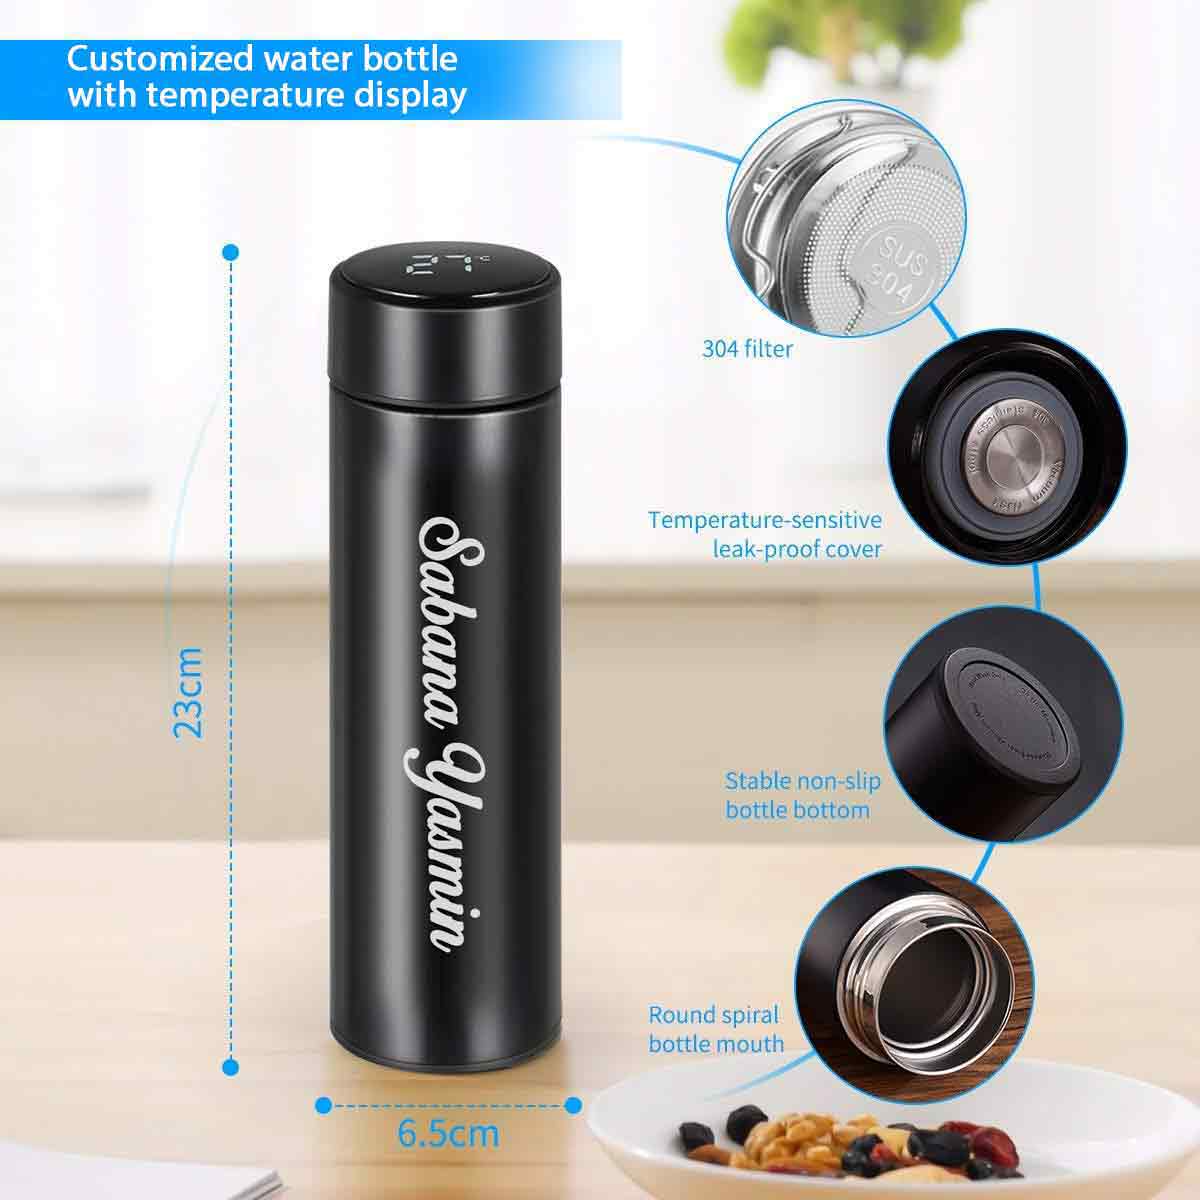 Customized name engraved vacuum flask with temperature display